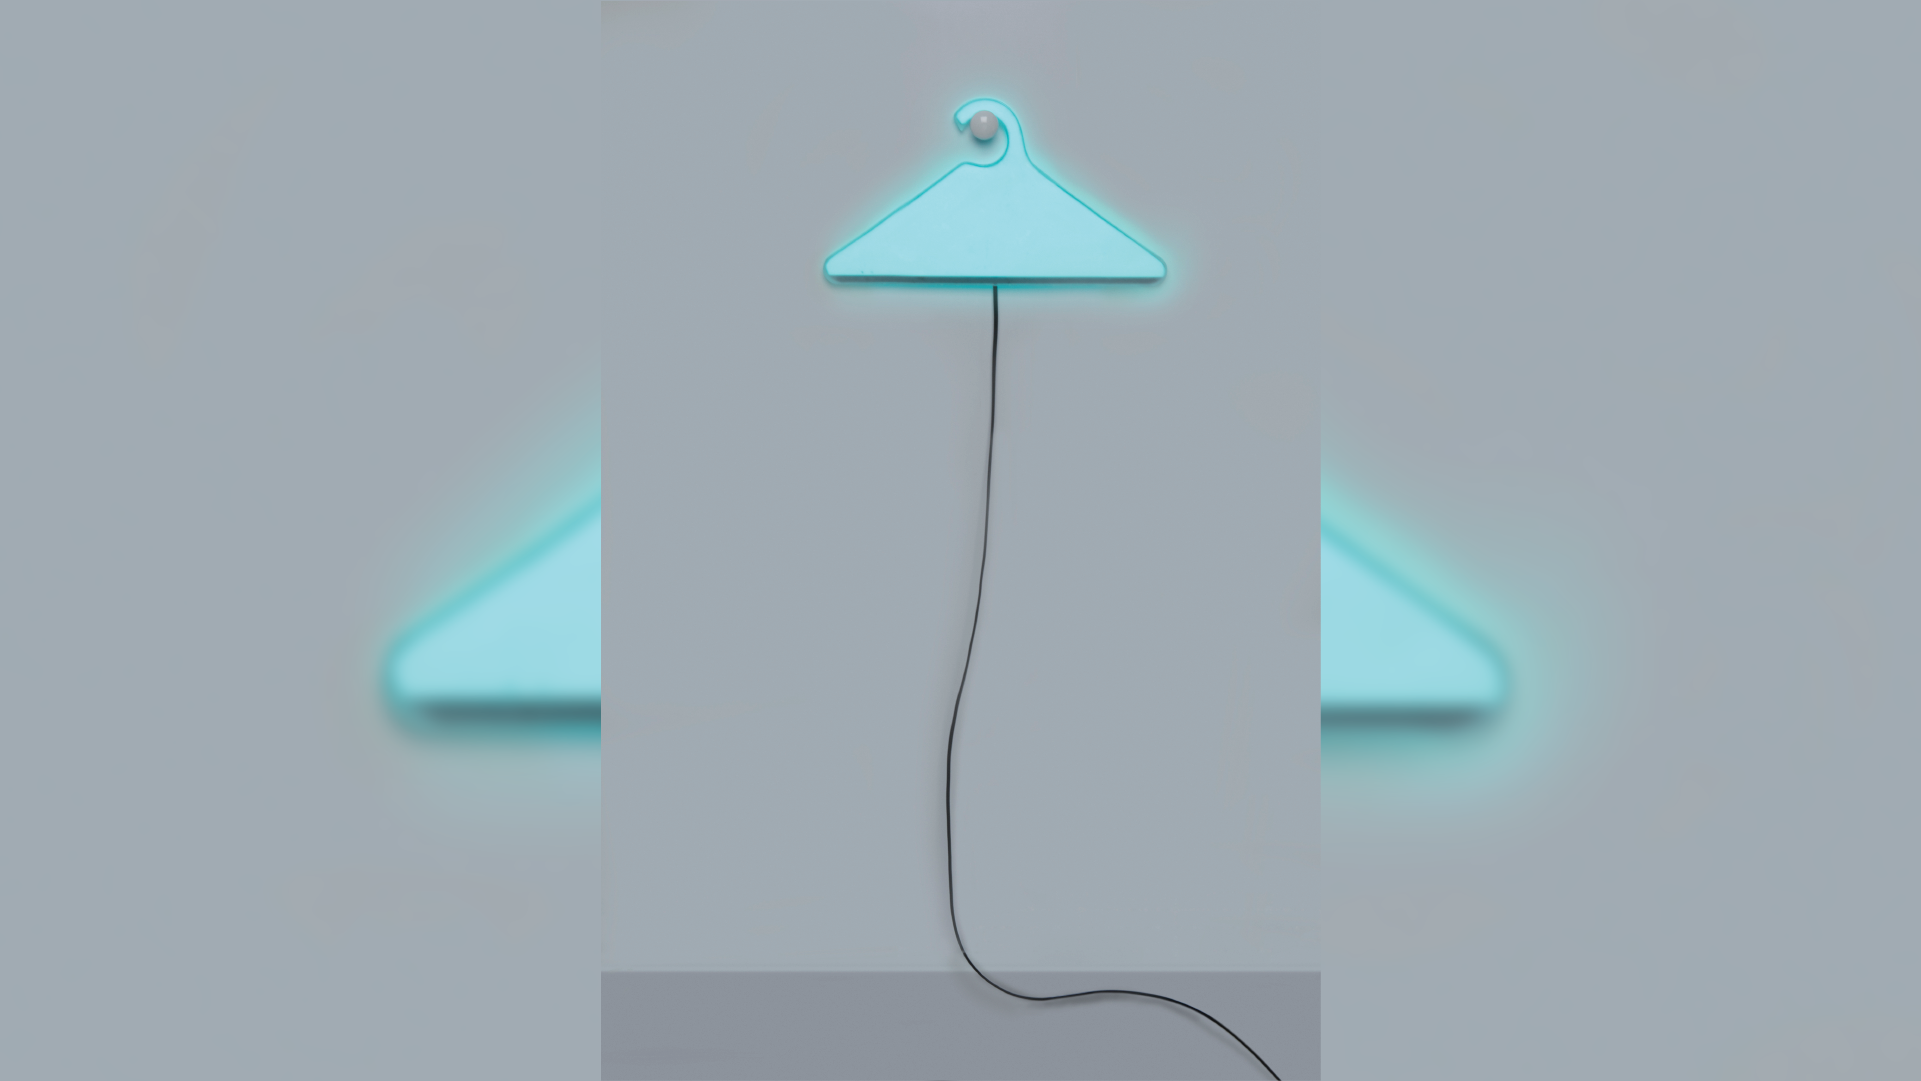 Clothes hanger with integrated light source.